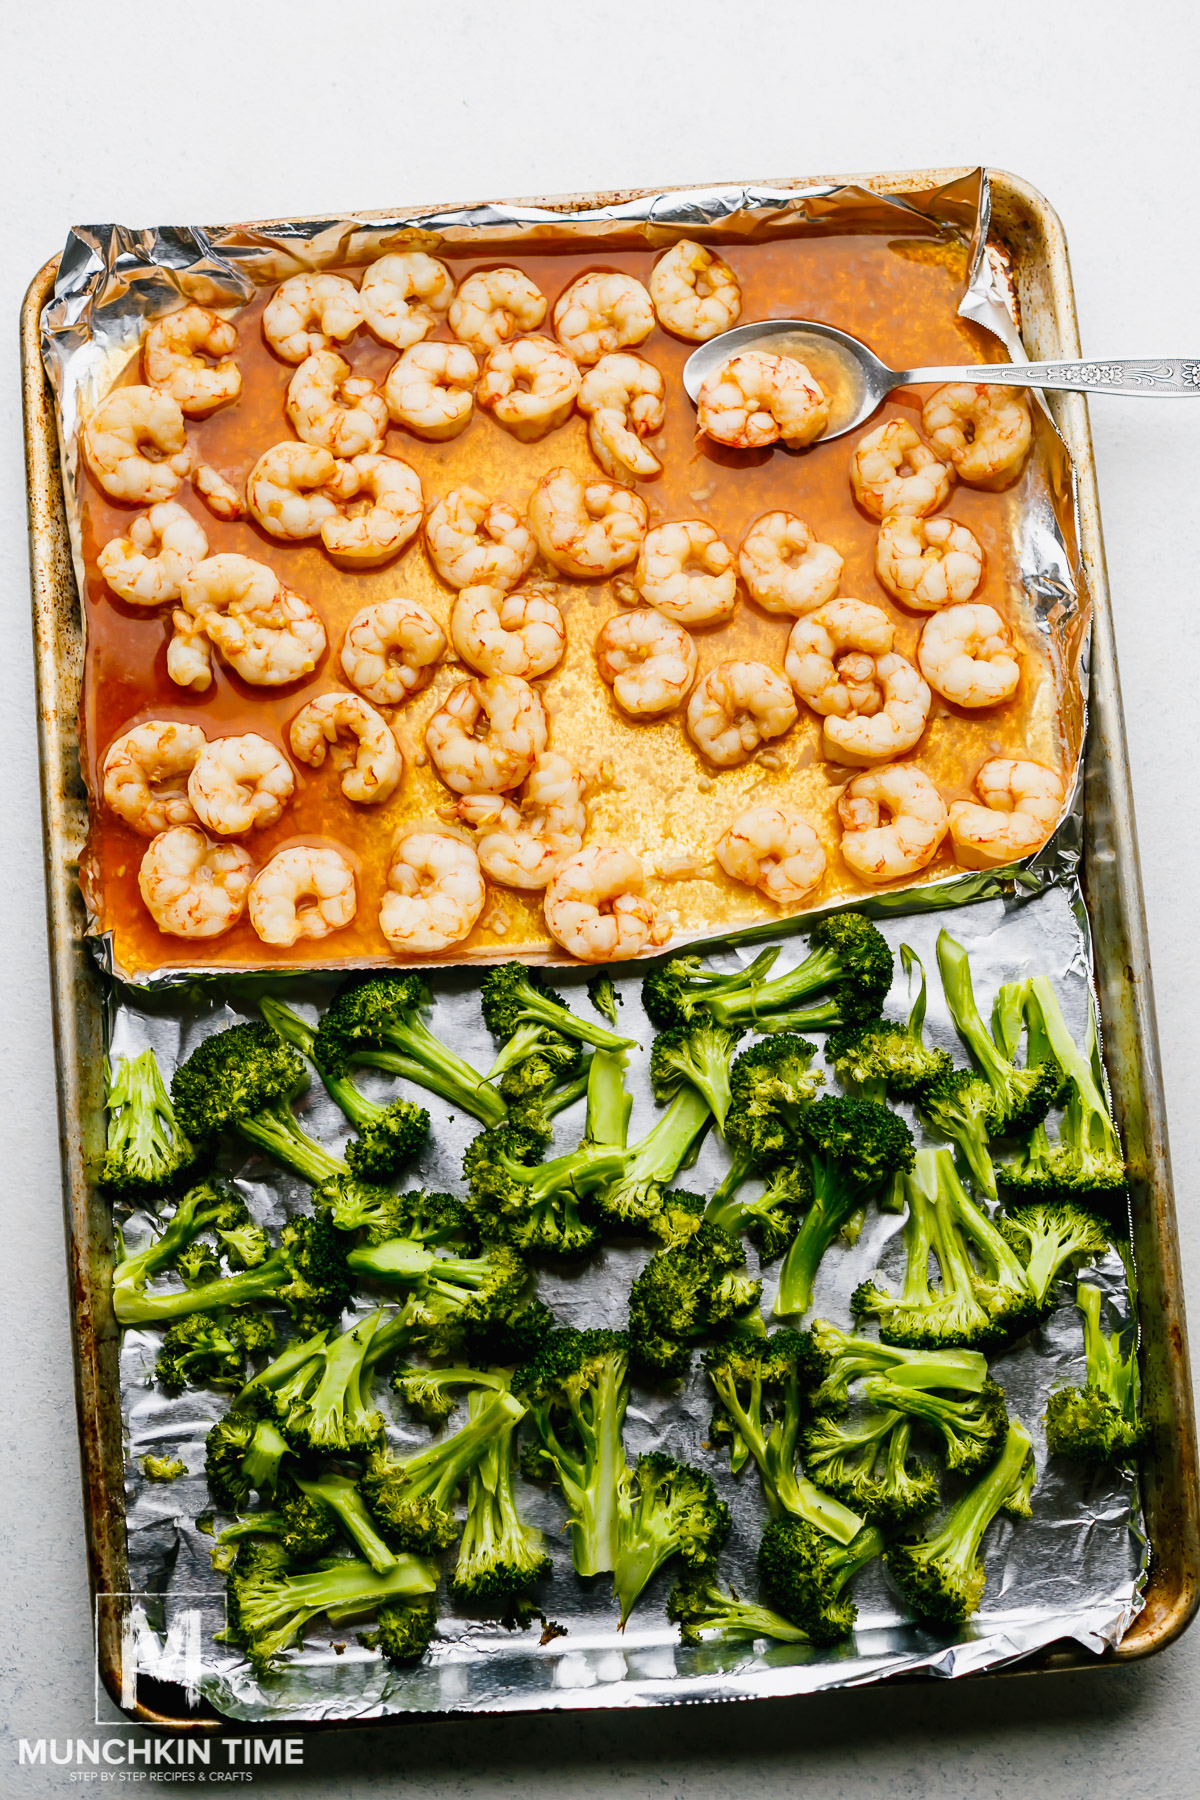 Honey Garlic Shrimp Recipe with roast broccoli is baked & ready for serving.